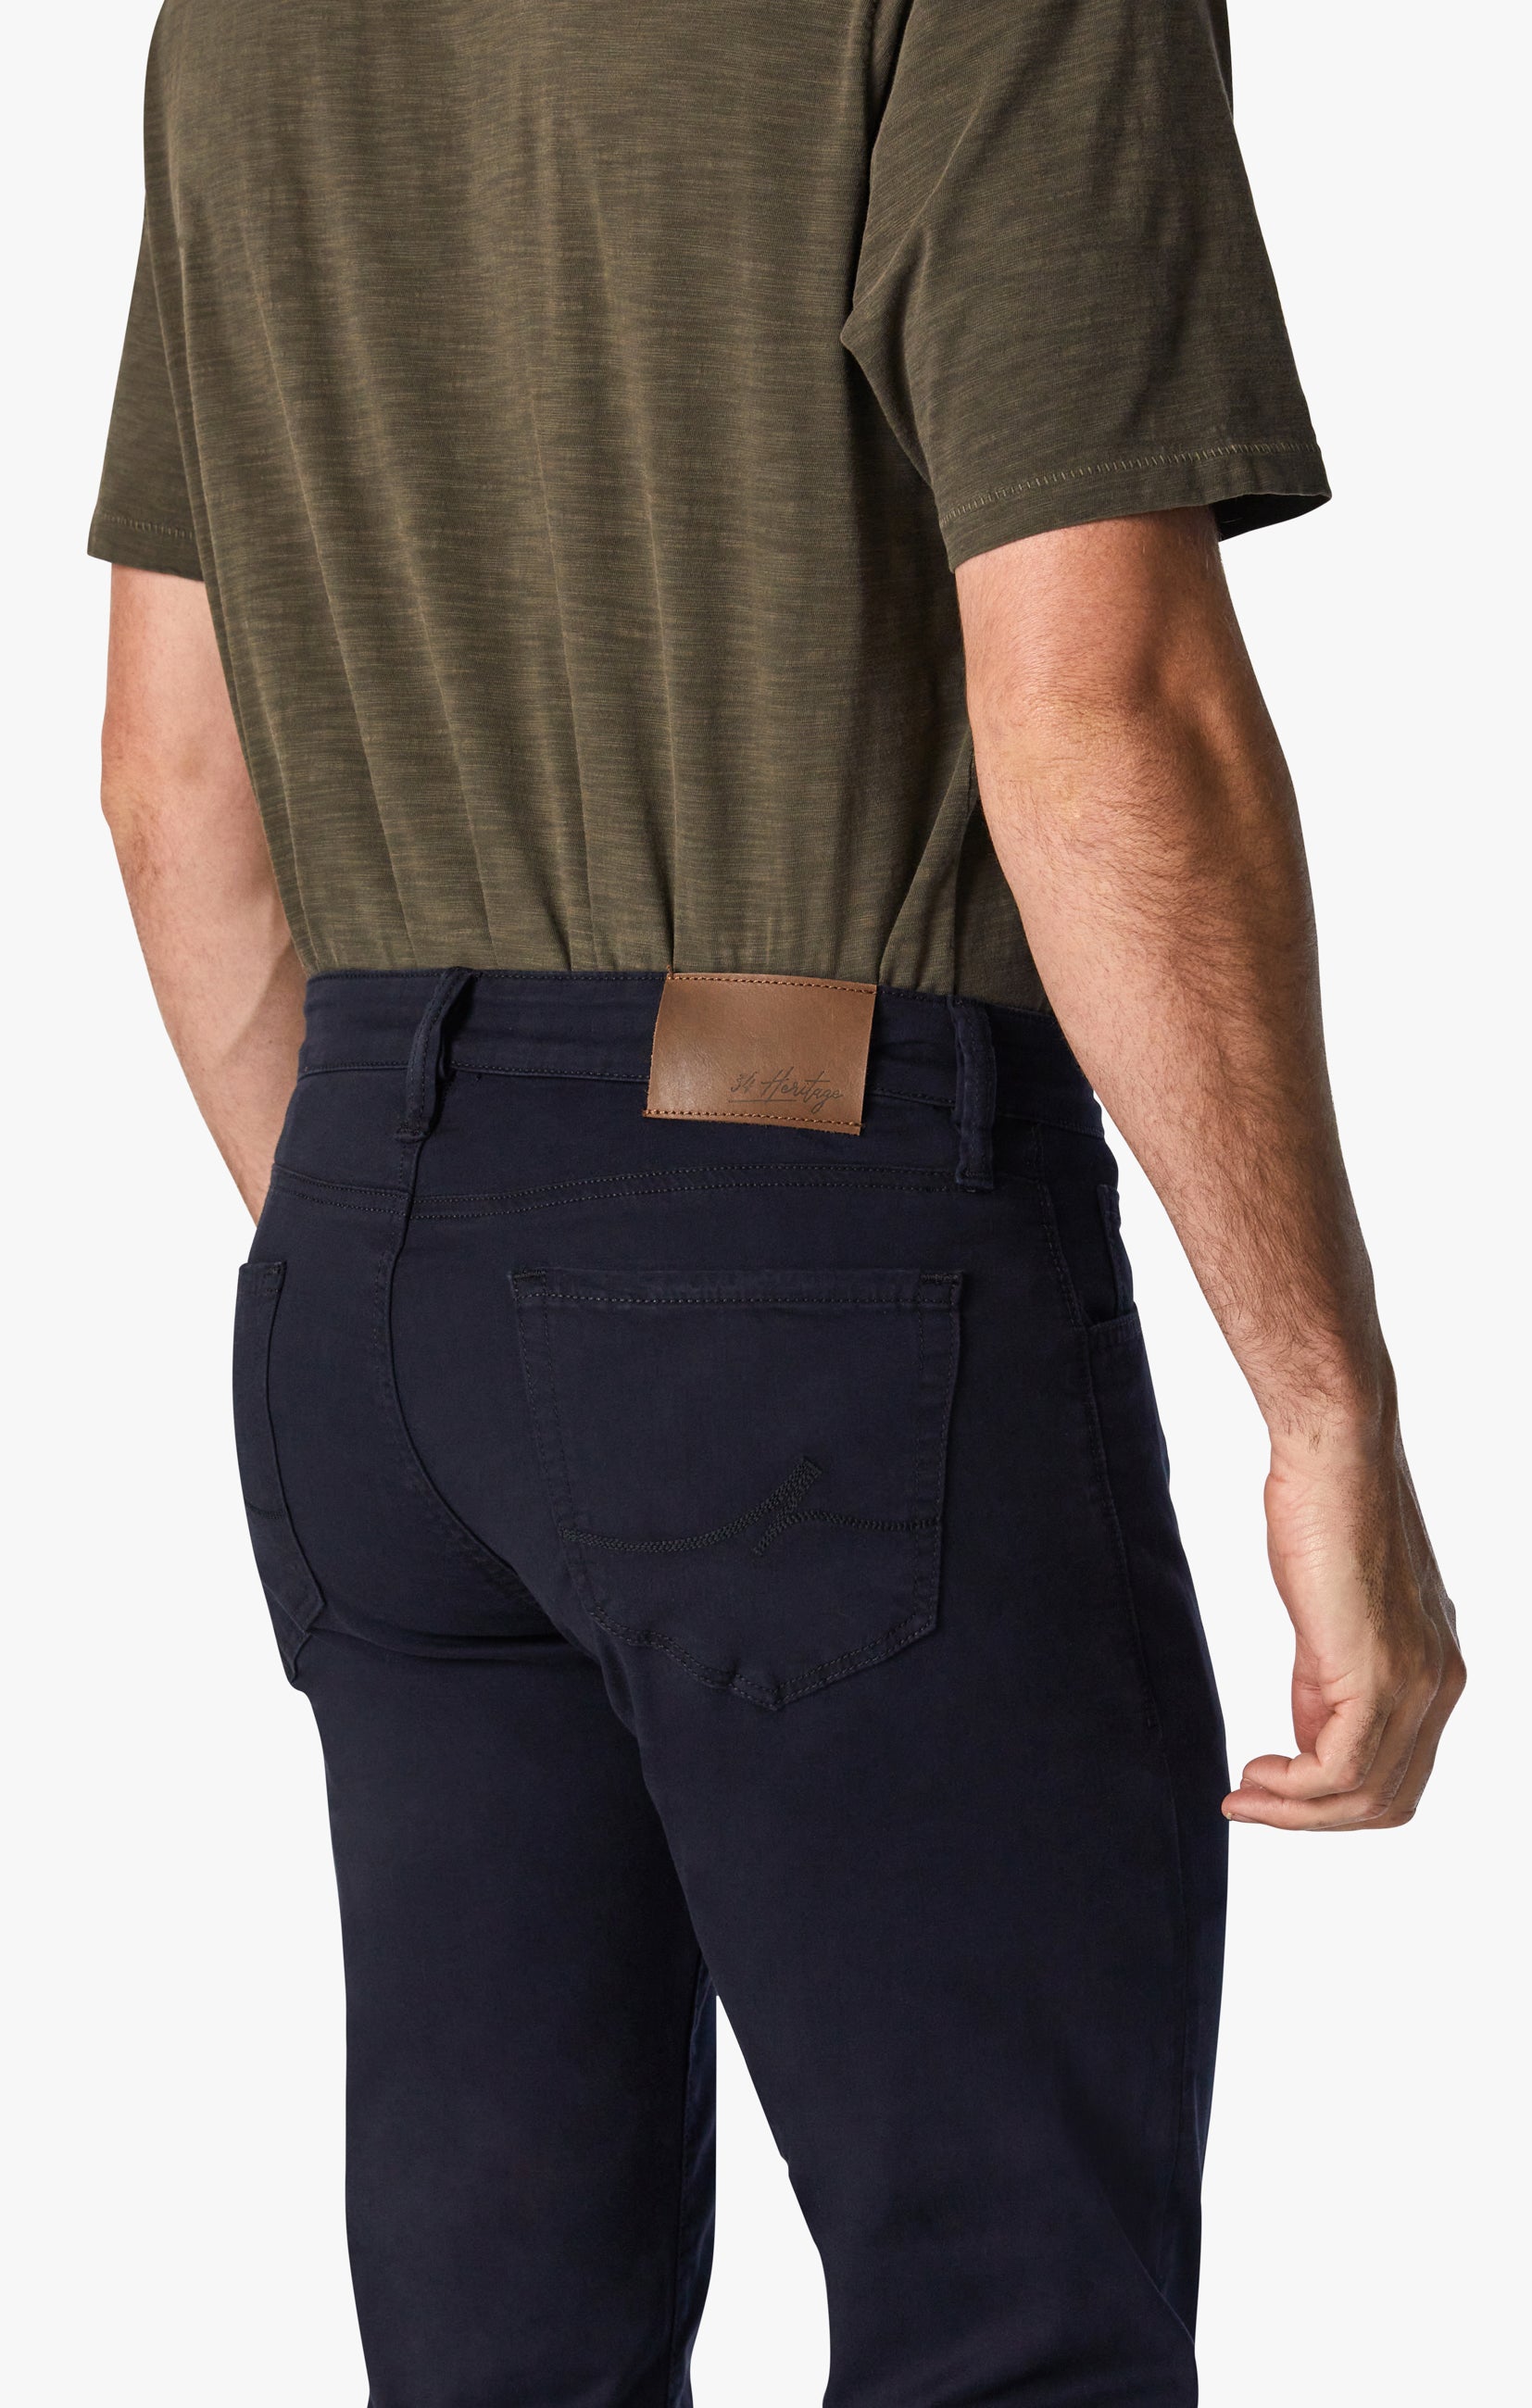 Courage Straight Leg Pants in Navy Twill Image 3